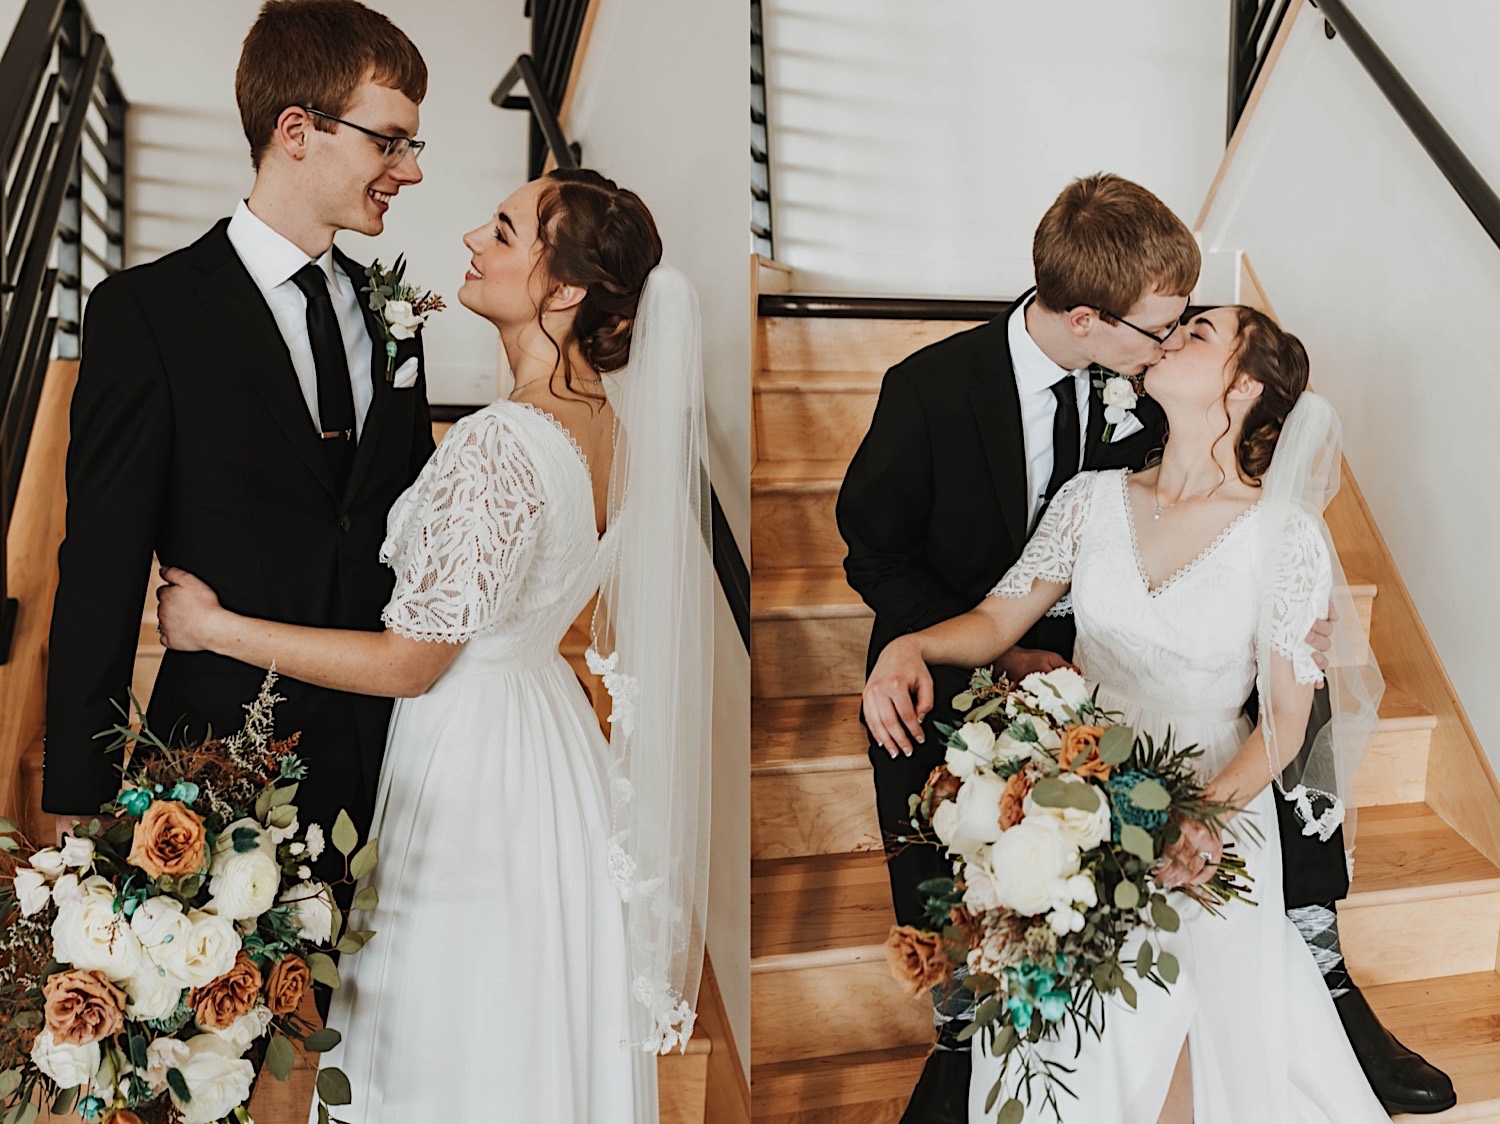 2 photos side by side of a bride and groom on a staircase together, in the left photo they are smiling at one another, in the right they are kissing as the bride sits in front of the groom